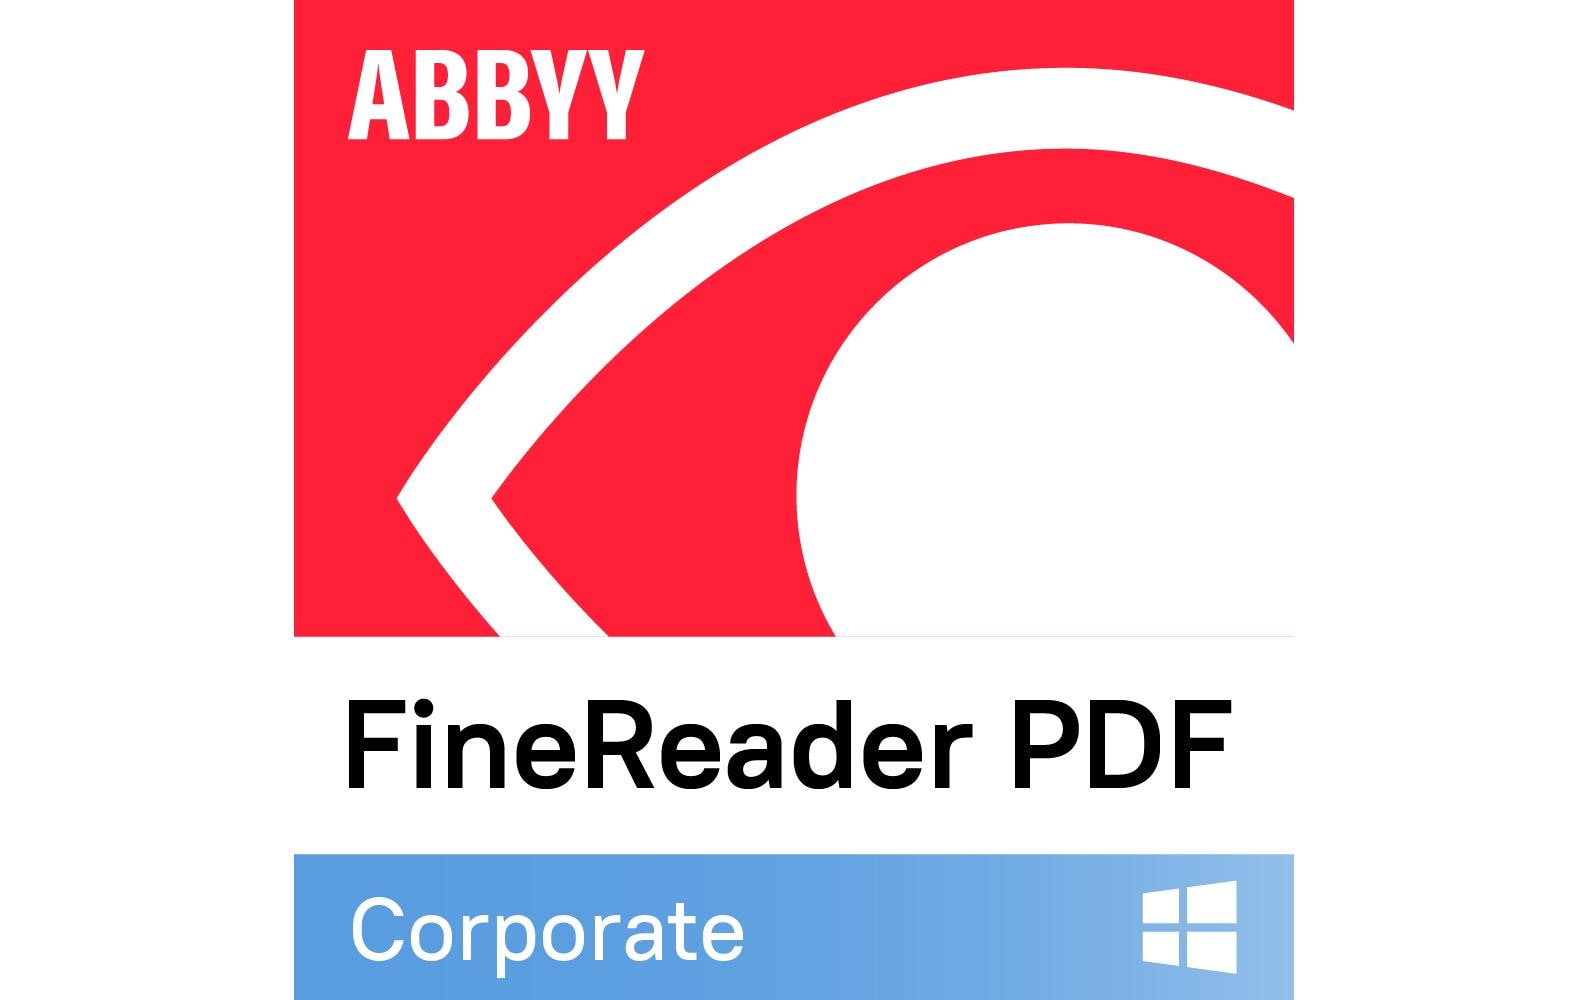 ABBYY FineReader PDF Corporate Subscr., per Seat, 26-50 User, 1yr